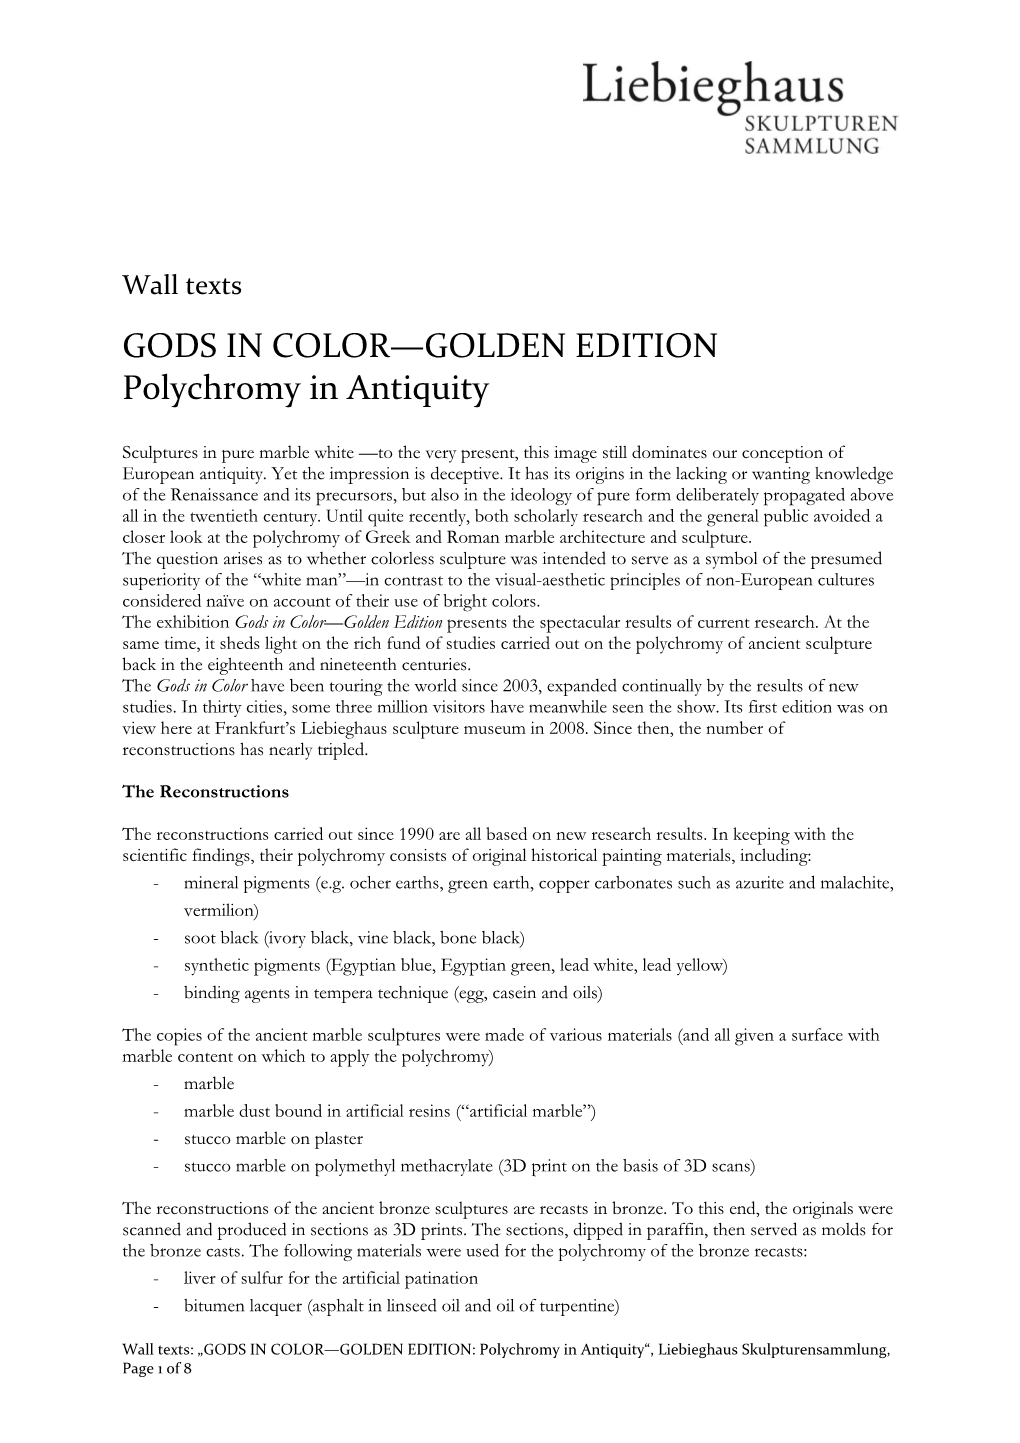 GODS in COLOR—GOLDEN EDITION Polychromy in Antiquity